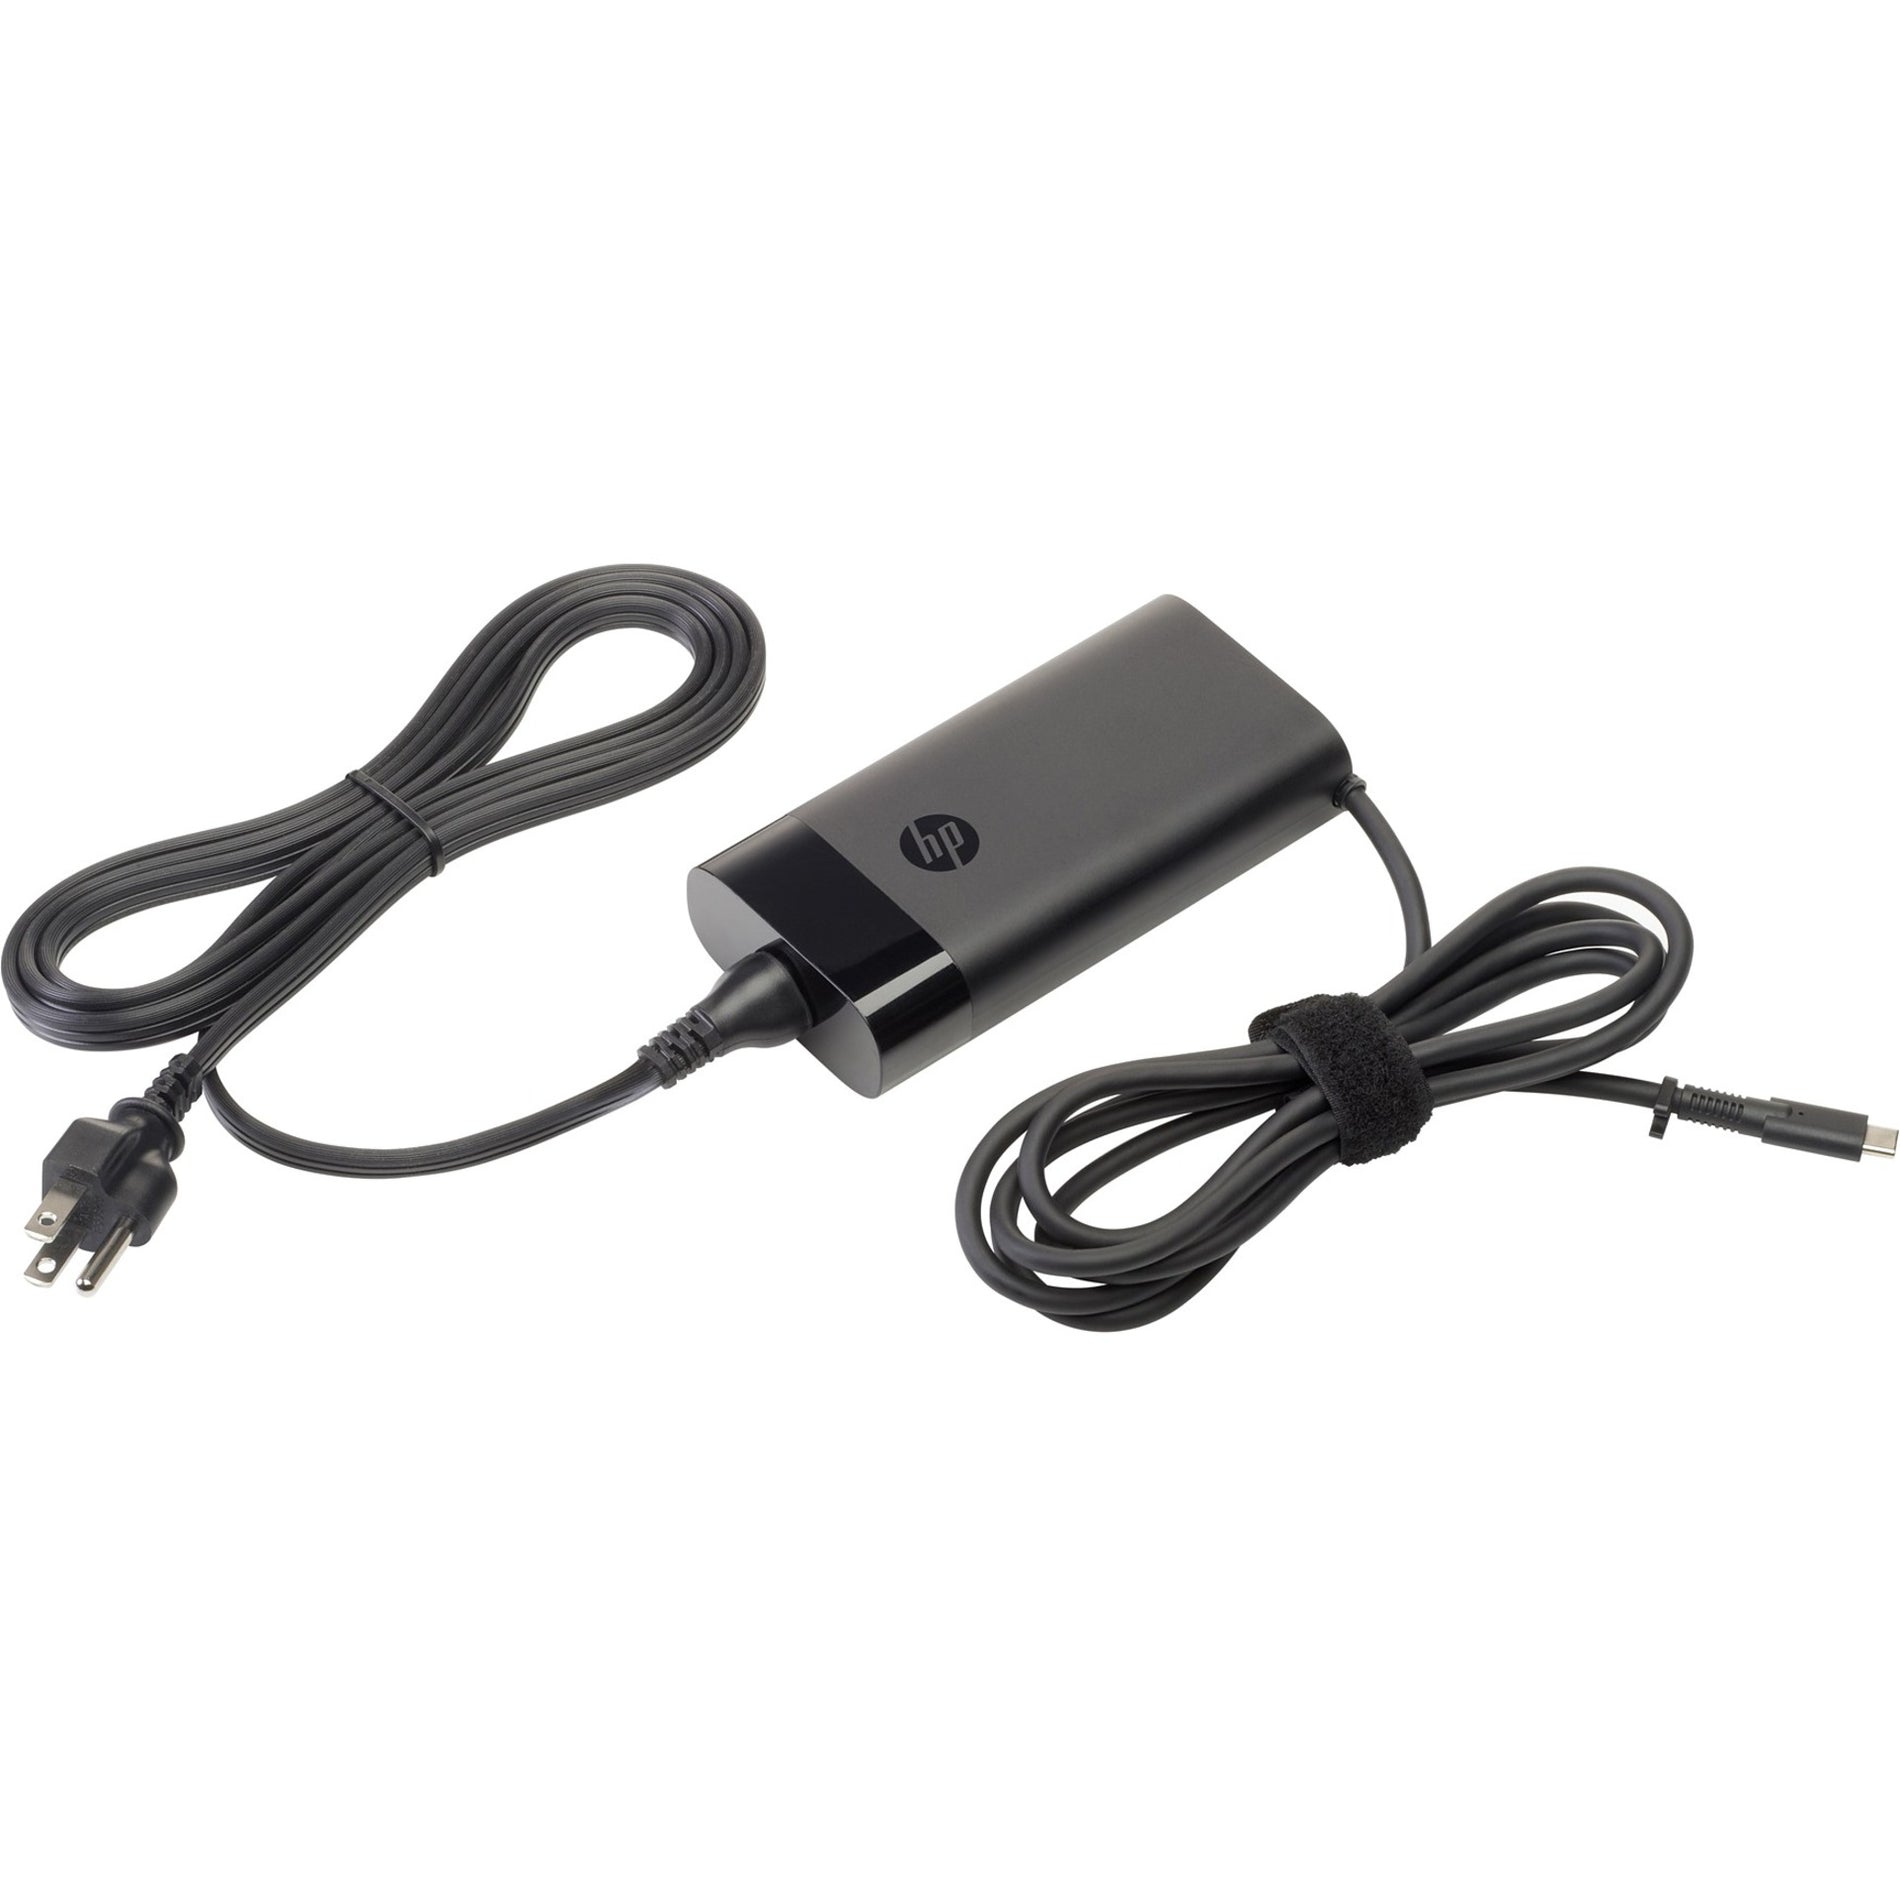 HP 2LN85AA 90W USB-C Power Adapter, Fast Charging for HP Business Notebook PCs